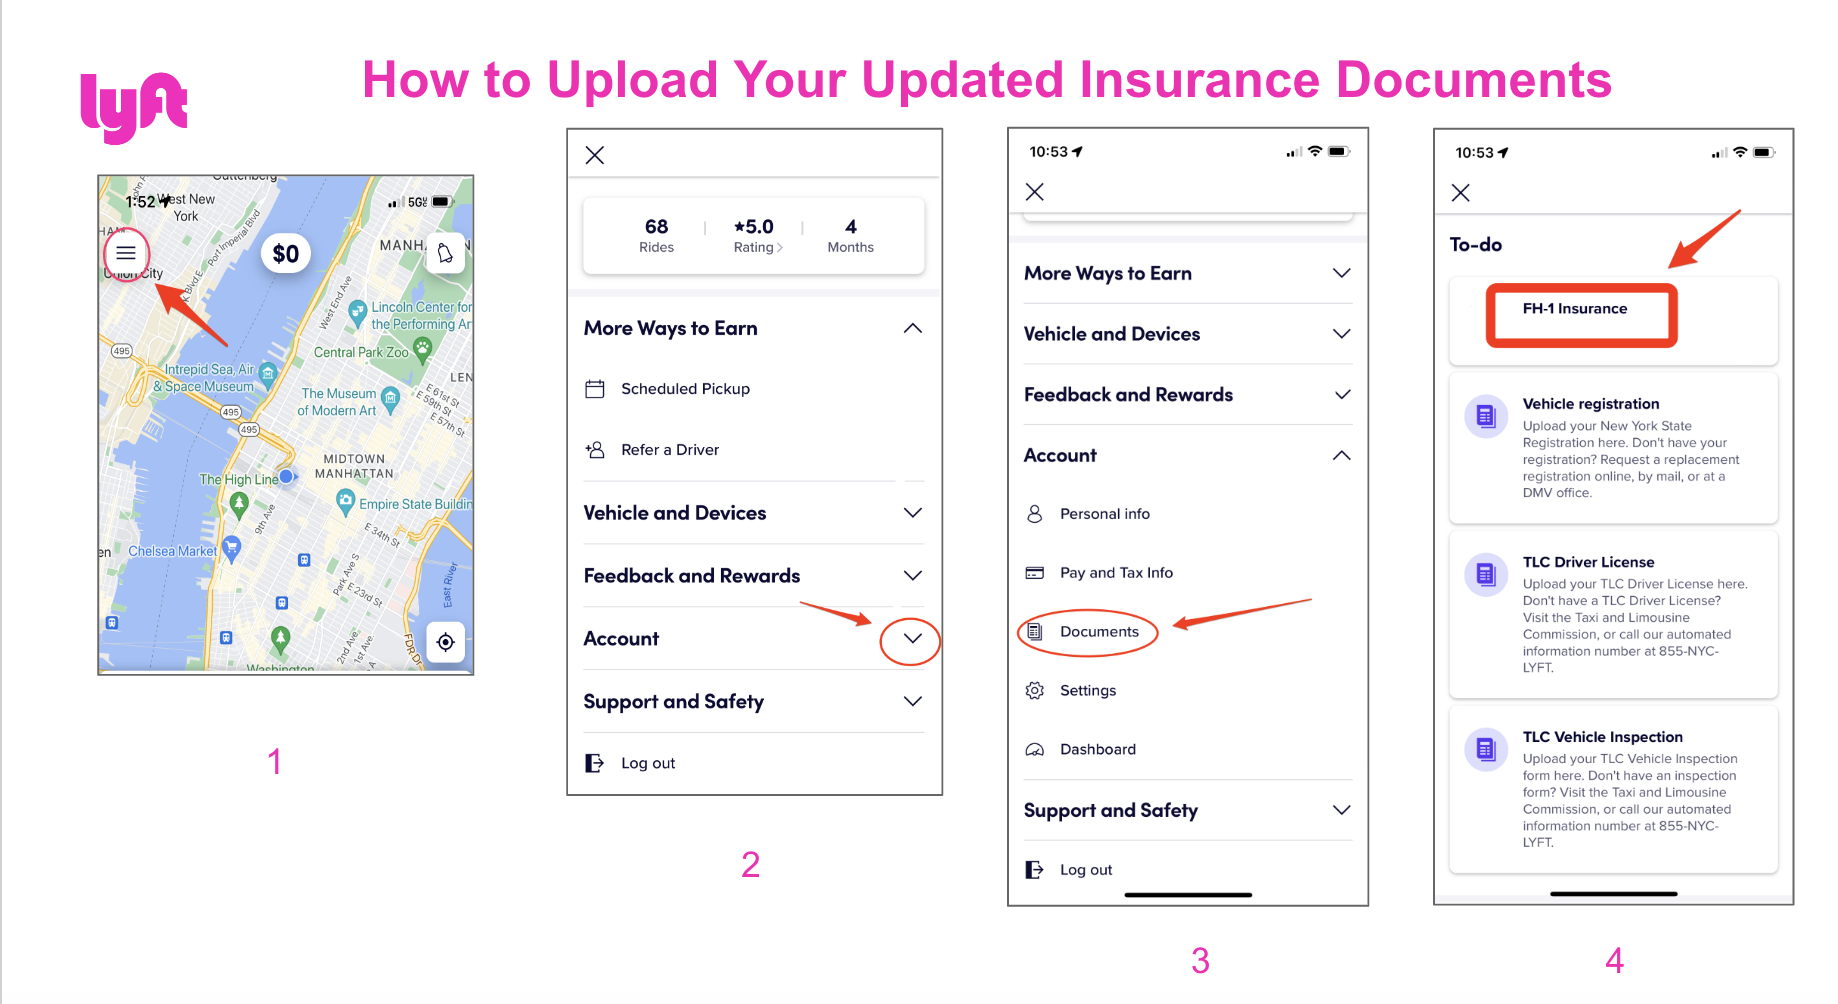 This image illustrates how to upload insurance documents in the app. After uploading, it may take at least an hour for documents to be reviewed.